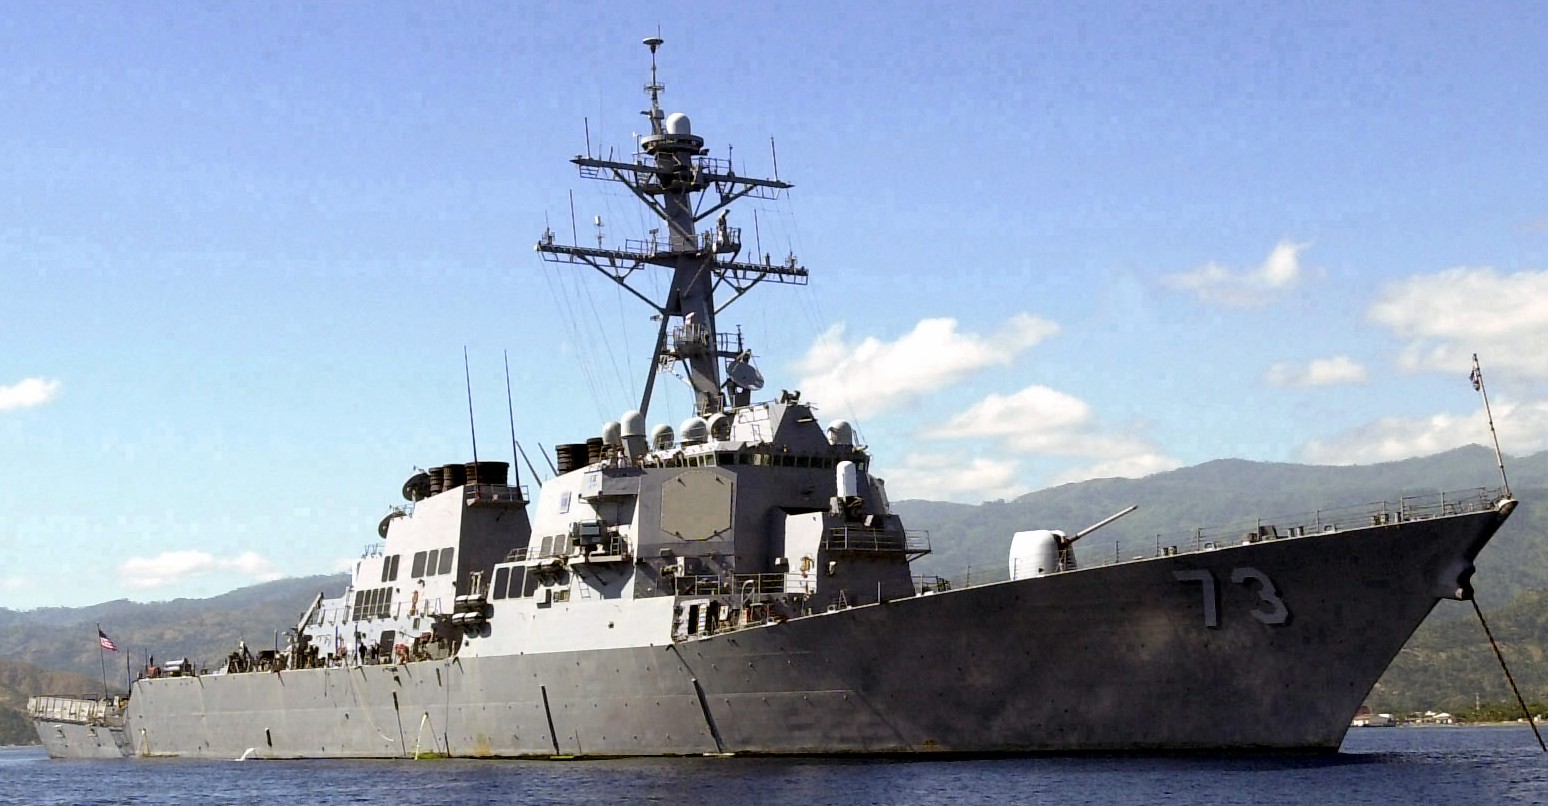 ddg-73 uss decatur guided missile destroyer arleigh burke class aegis bmd 46 dili east timor